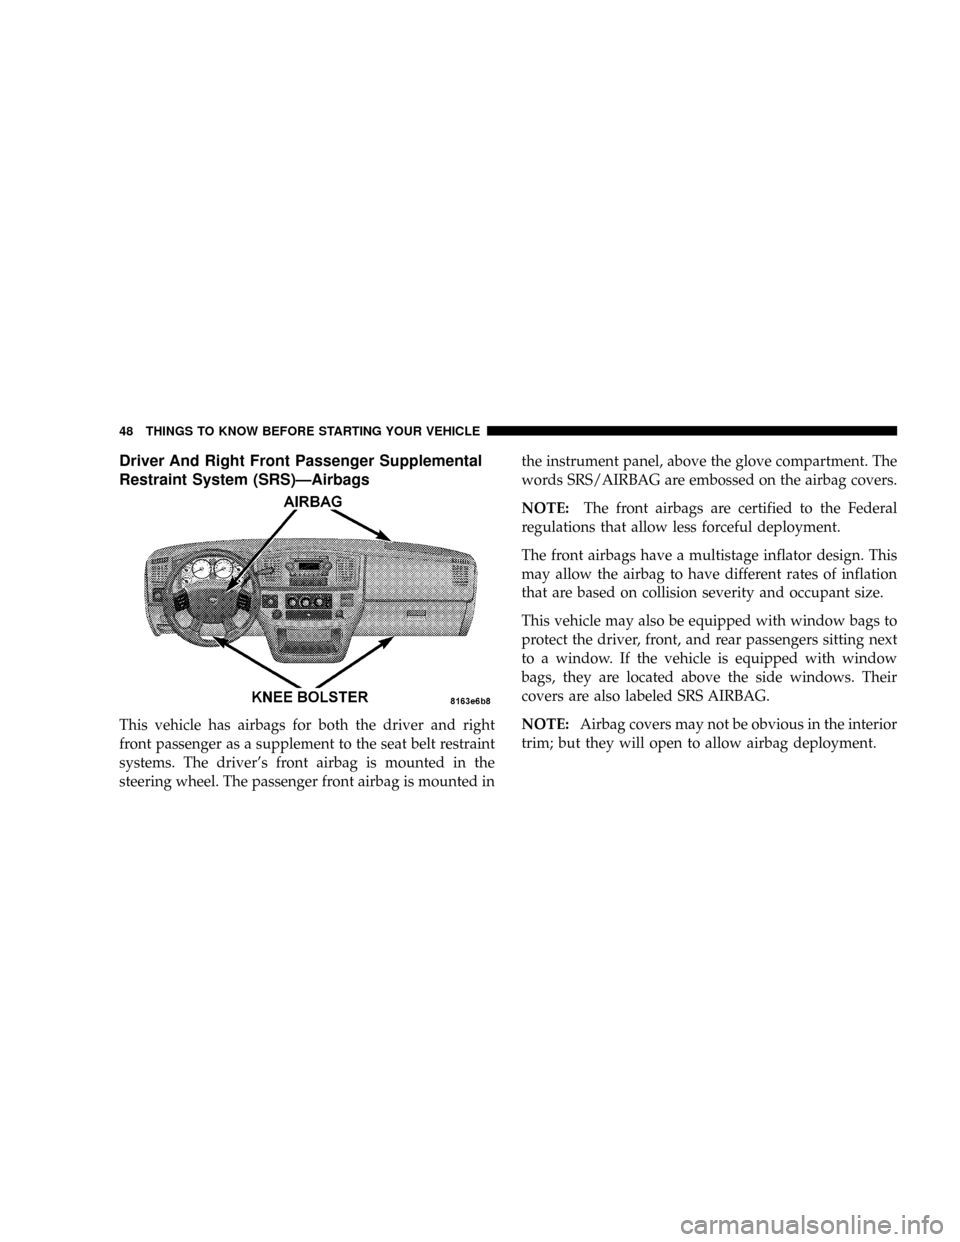 DODGE RAM 3500 GAS 2008 3.G Owners Manual Driver And Right Front Passenger Supplemental
Restraint System (SRS)ÐAirbags
This vehicle has airbags for both the driver and right
front passenger as a supplement to the seat belt restraint
systems.